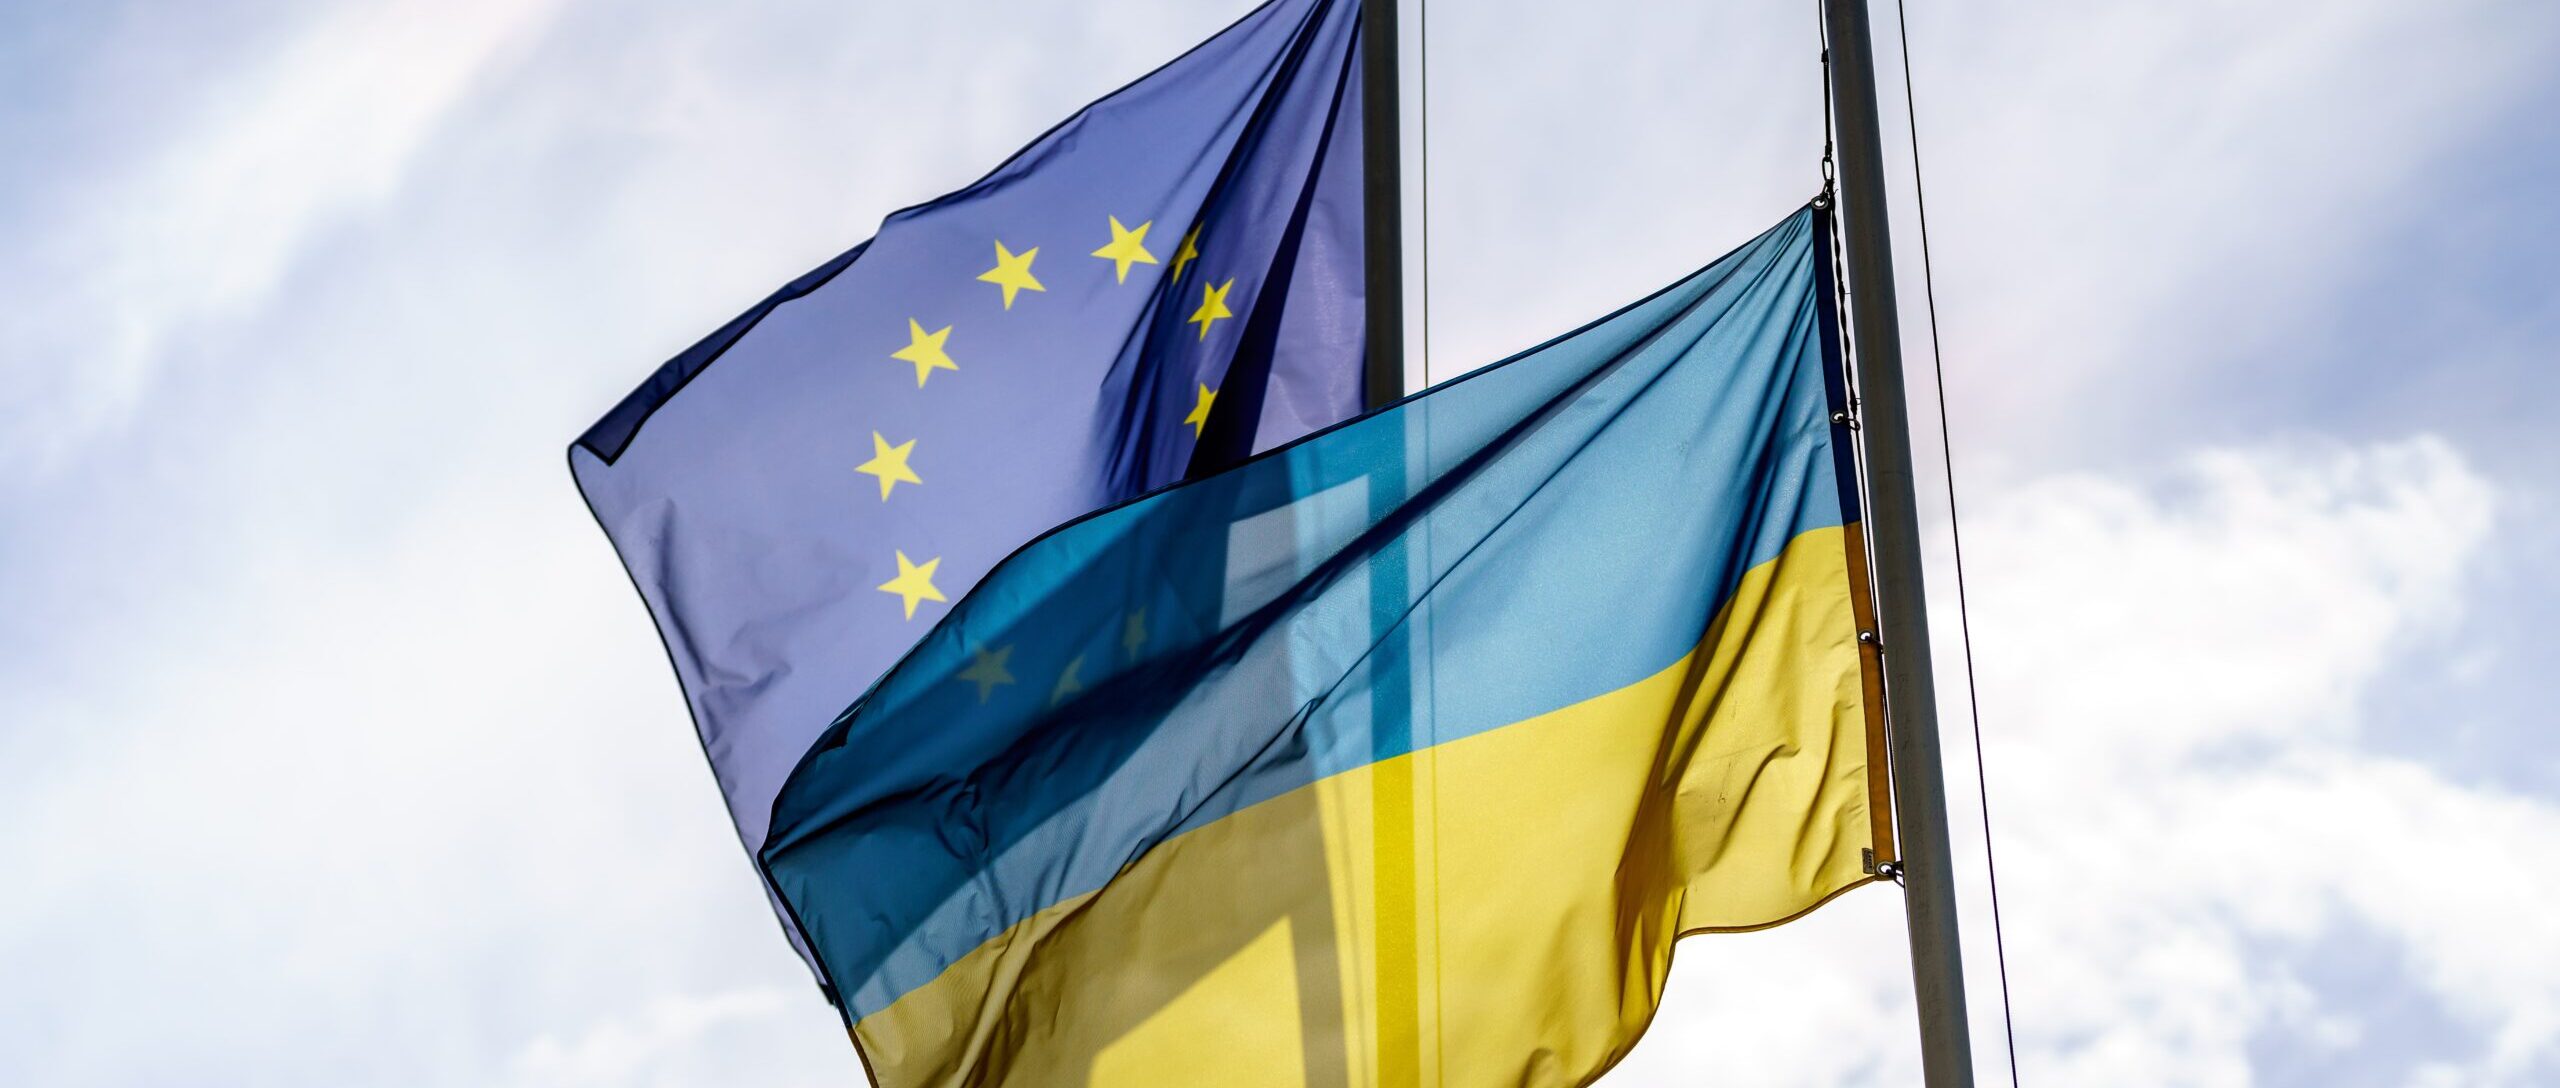 “From Kyiv to Lisbon”: Ukrainian Communities appeal to Europe to support Ukraine